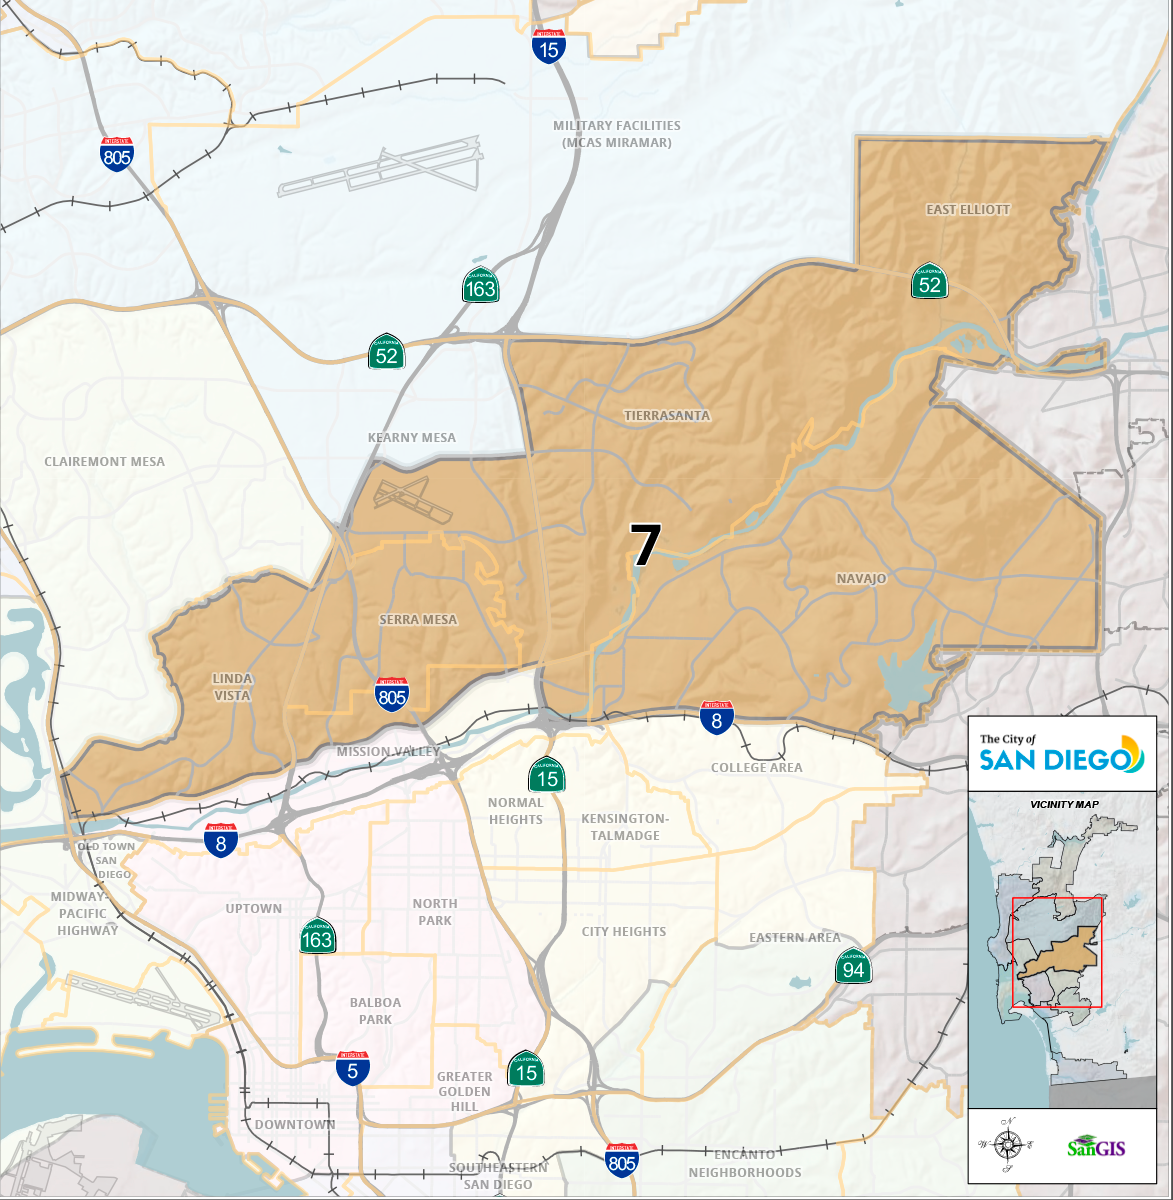 District 7 map